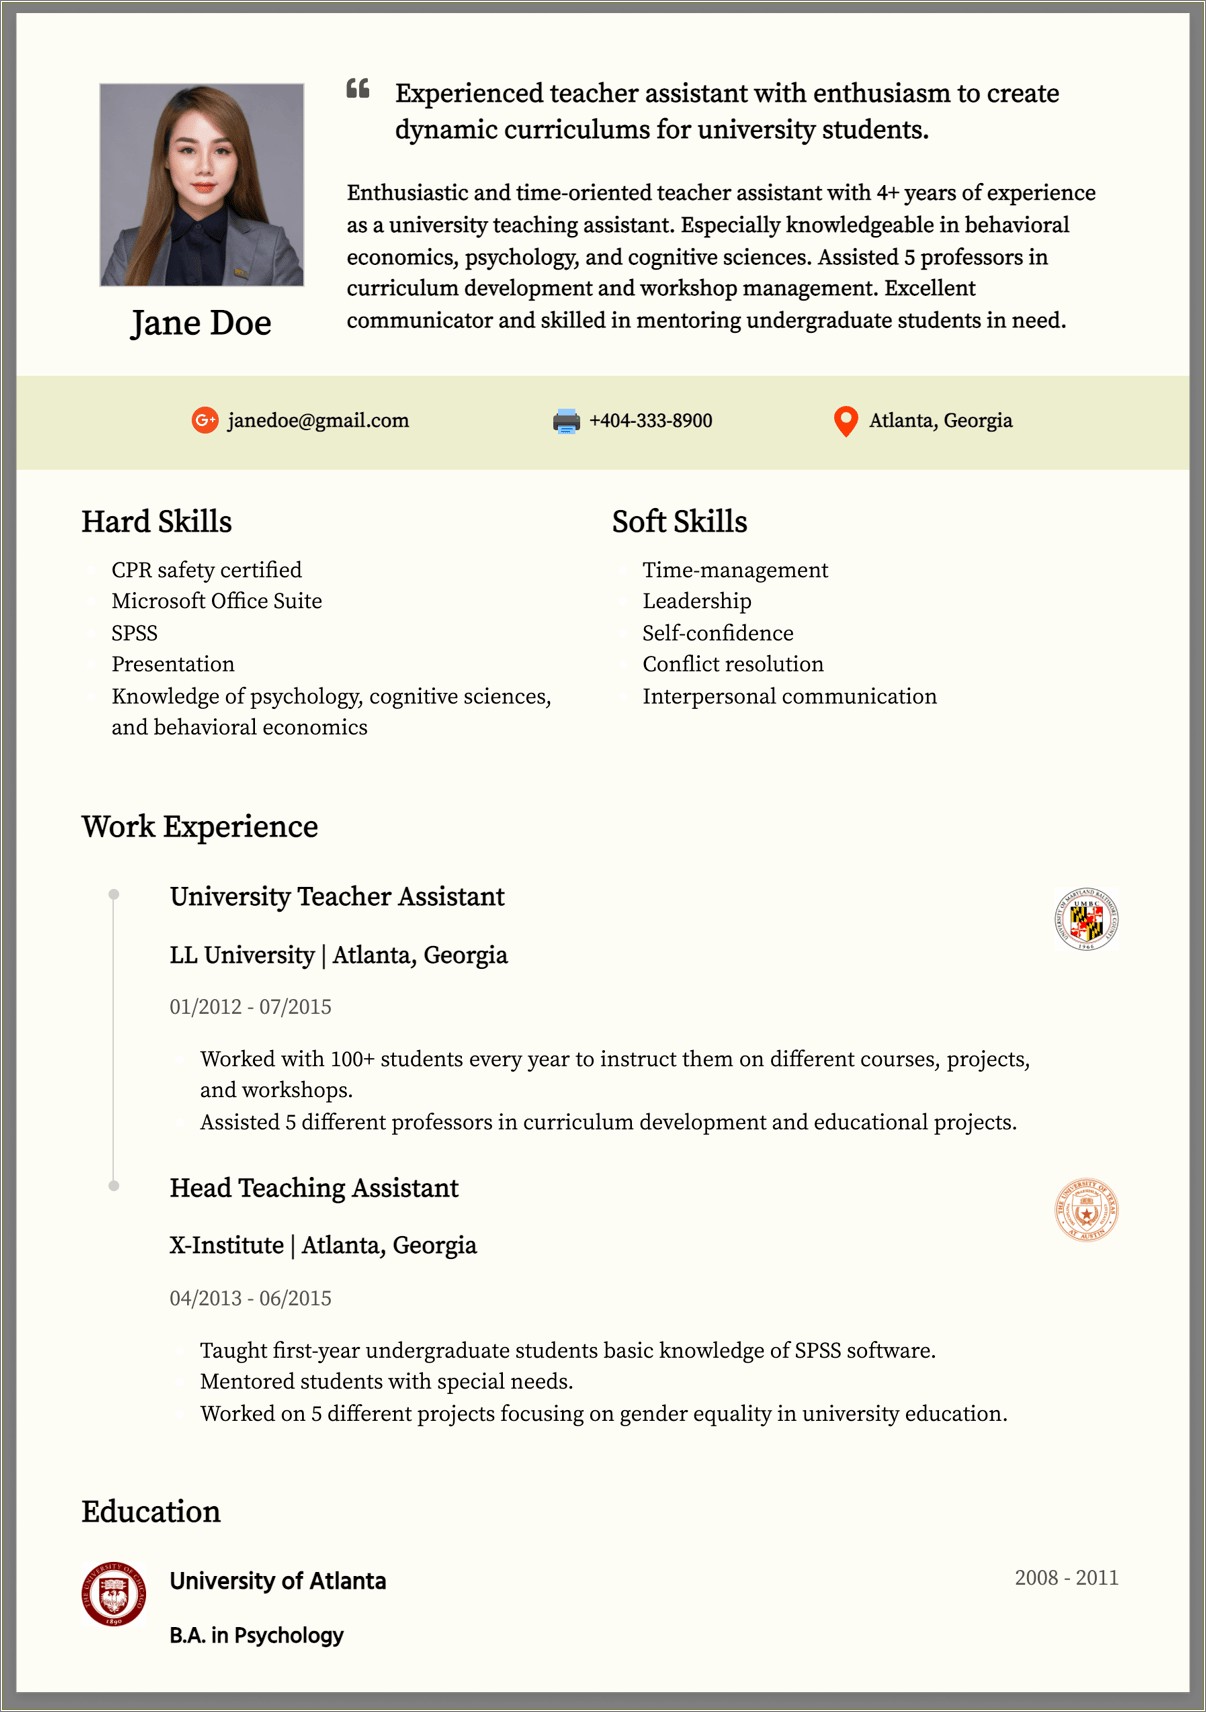 Sample Resume For Special Education Aide